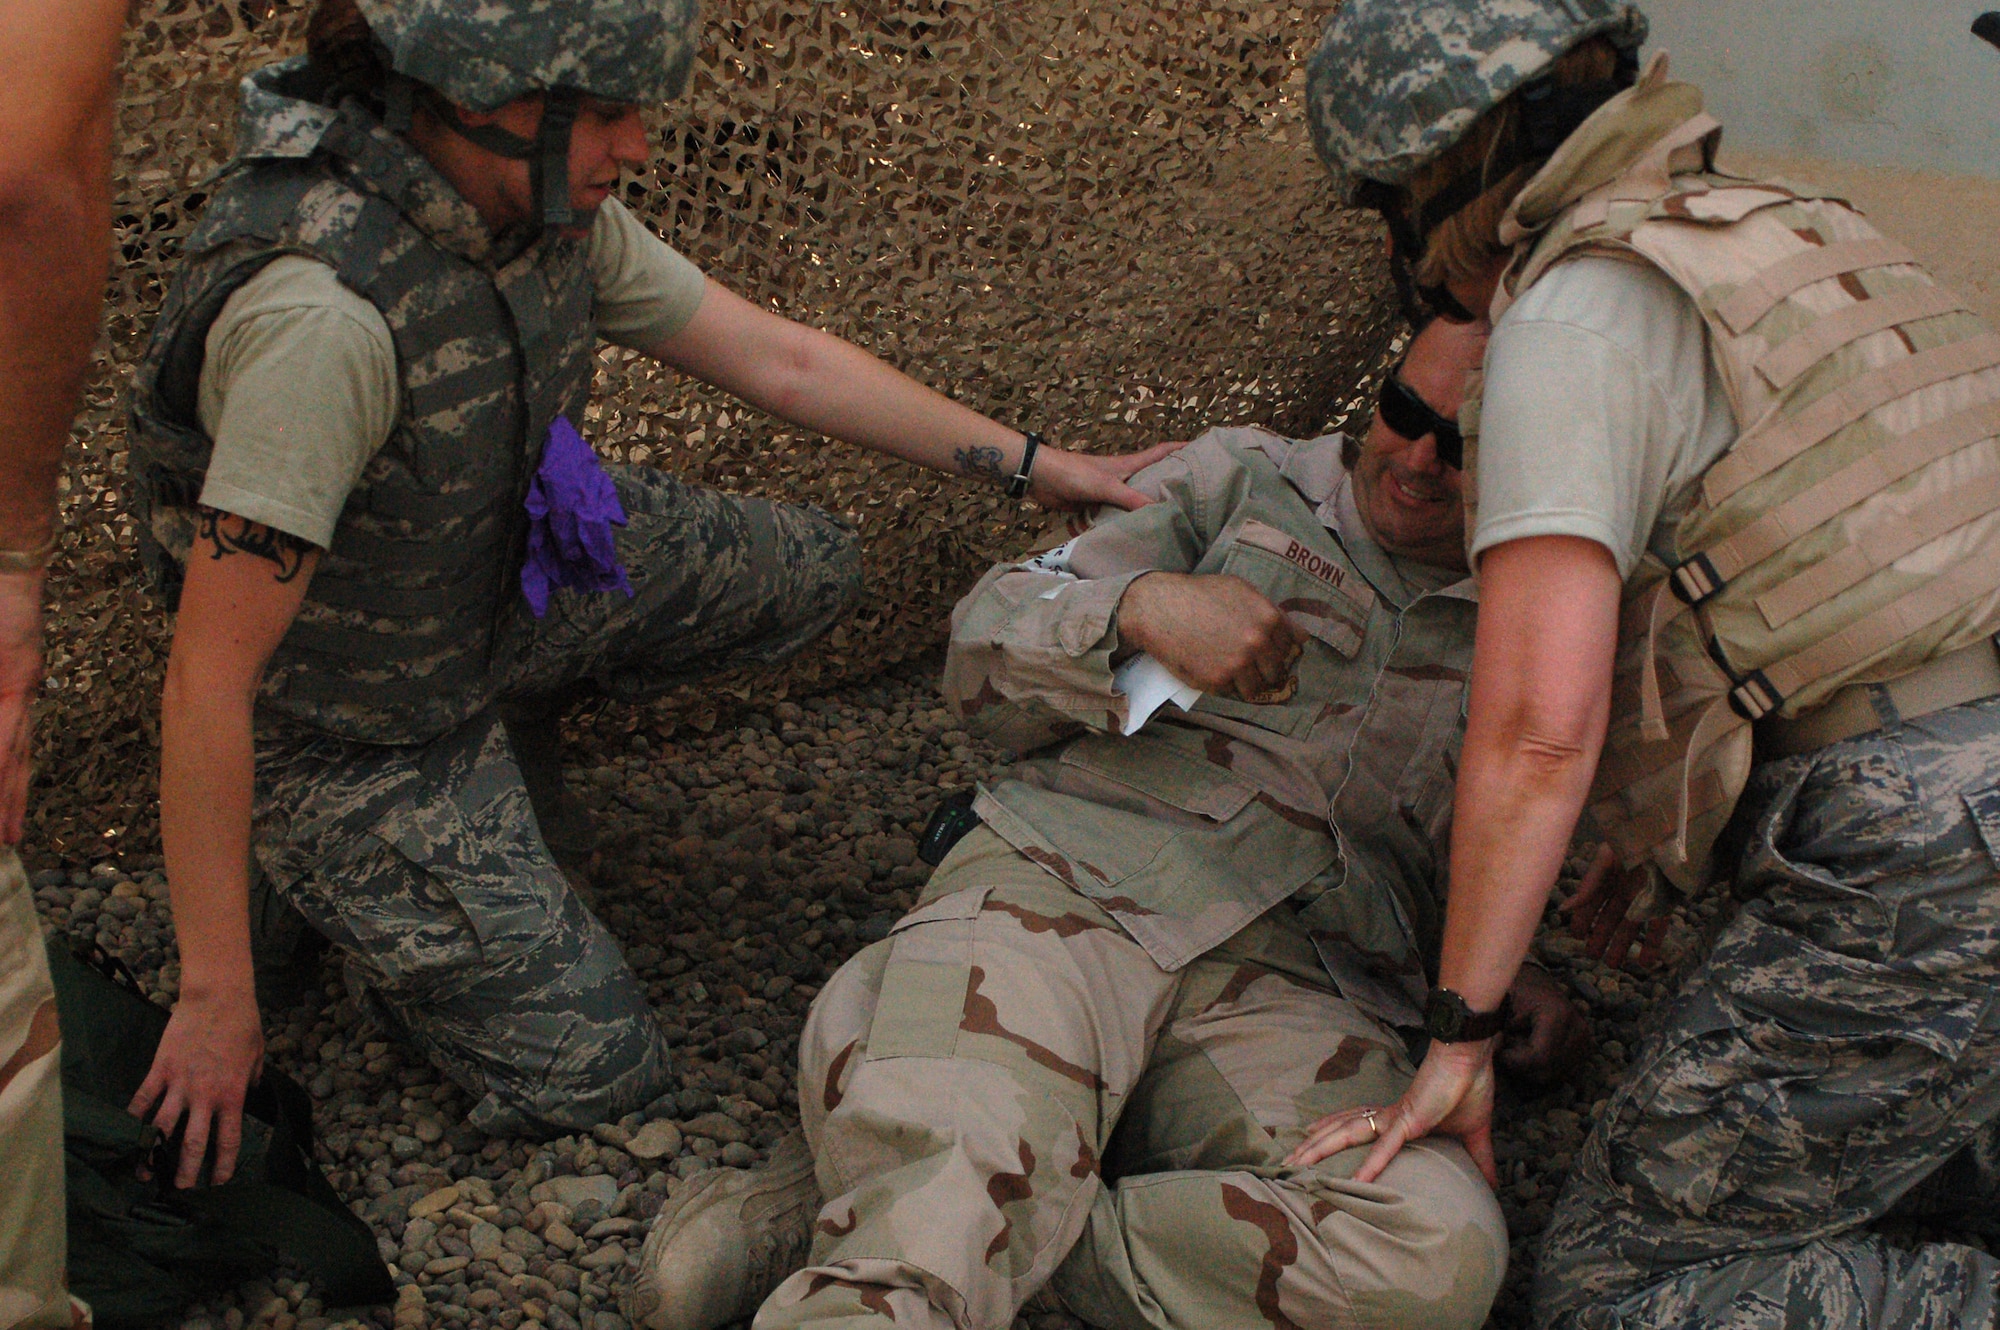 Staff Sgt. Jalayne Powers (left) and Lt. Col. Patricia Hartman assess the simulated injuries of Senior Master Sgt. Michael Brown March 21 at Sather Air Base, Iraq. The injuries are the result of a simulated unexploded oridence detination. The training teaches medical skills to non-clinical unit members. Sergeant Powers is a 447th Expeditionary Medical Squadron bioenvironmental engineer technician. Colonel Hartman is the chief administrator with the 447 EMEDS. Sergeant Brown is the 447th Expeditionary Civil Engineer Squadron's fire department fire chief. (U.S. Air Force photo/Tech. Sgt. Amanda Callahan) 